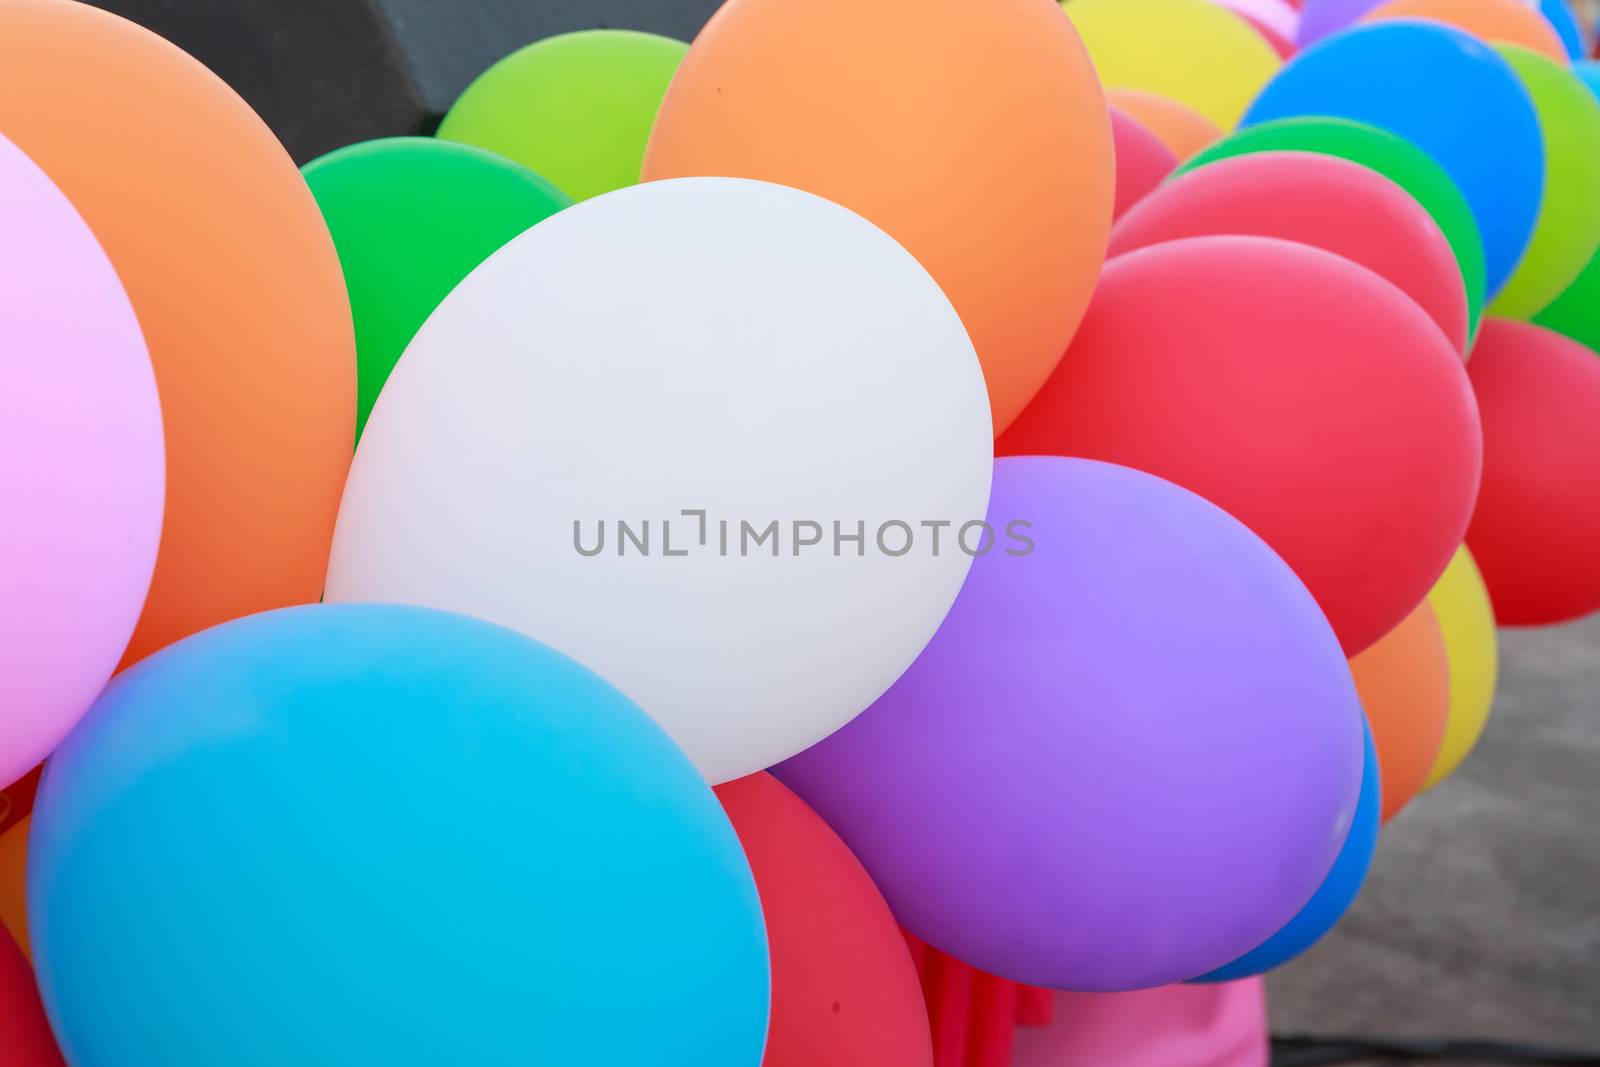 Balloon by smuay